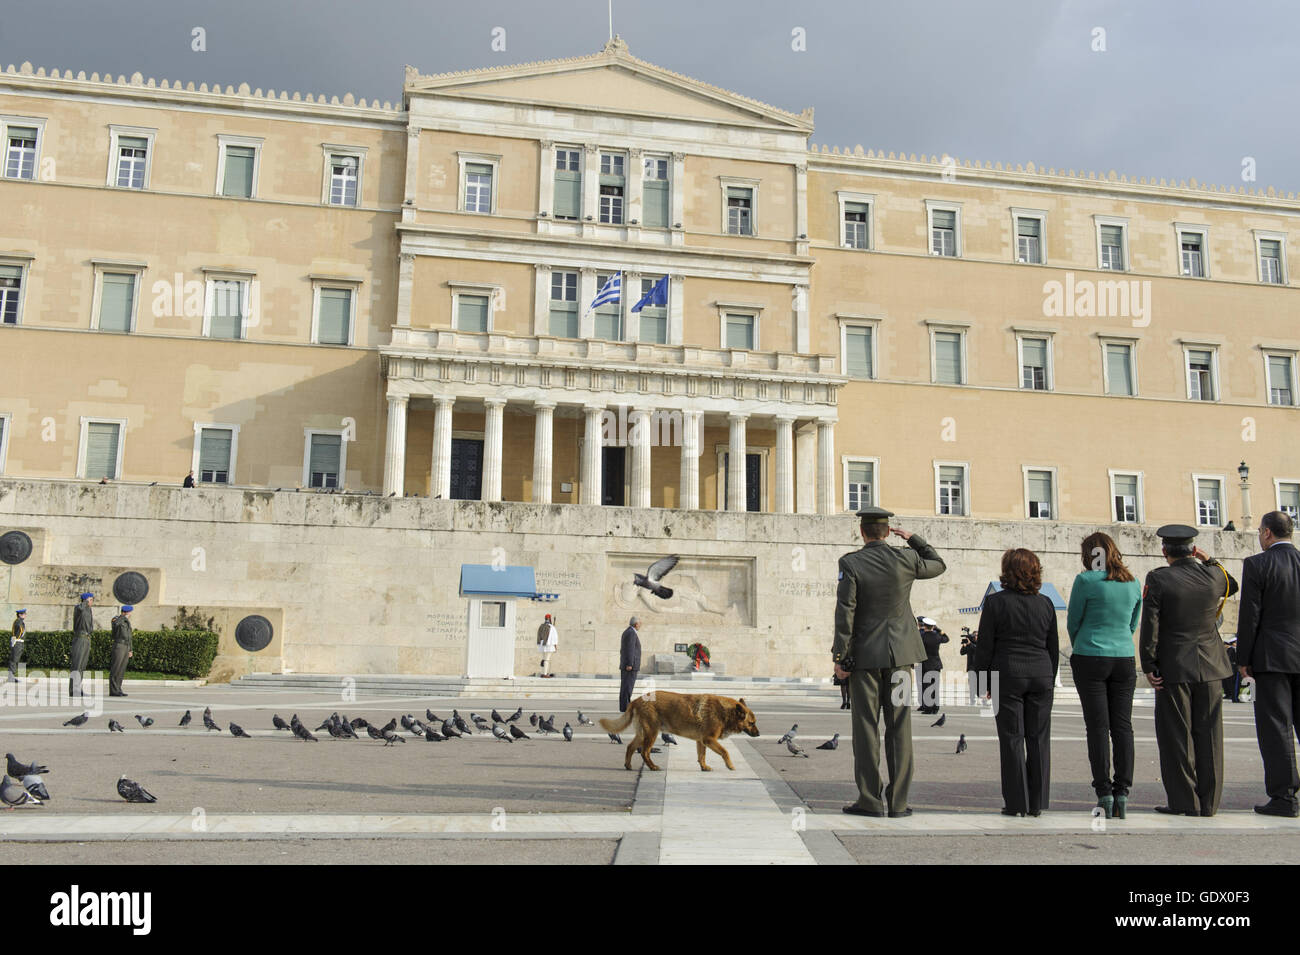 The building of the Hellenic Parliament and the Tomb of the Unknown Soldier Stock Photo